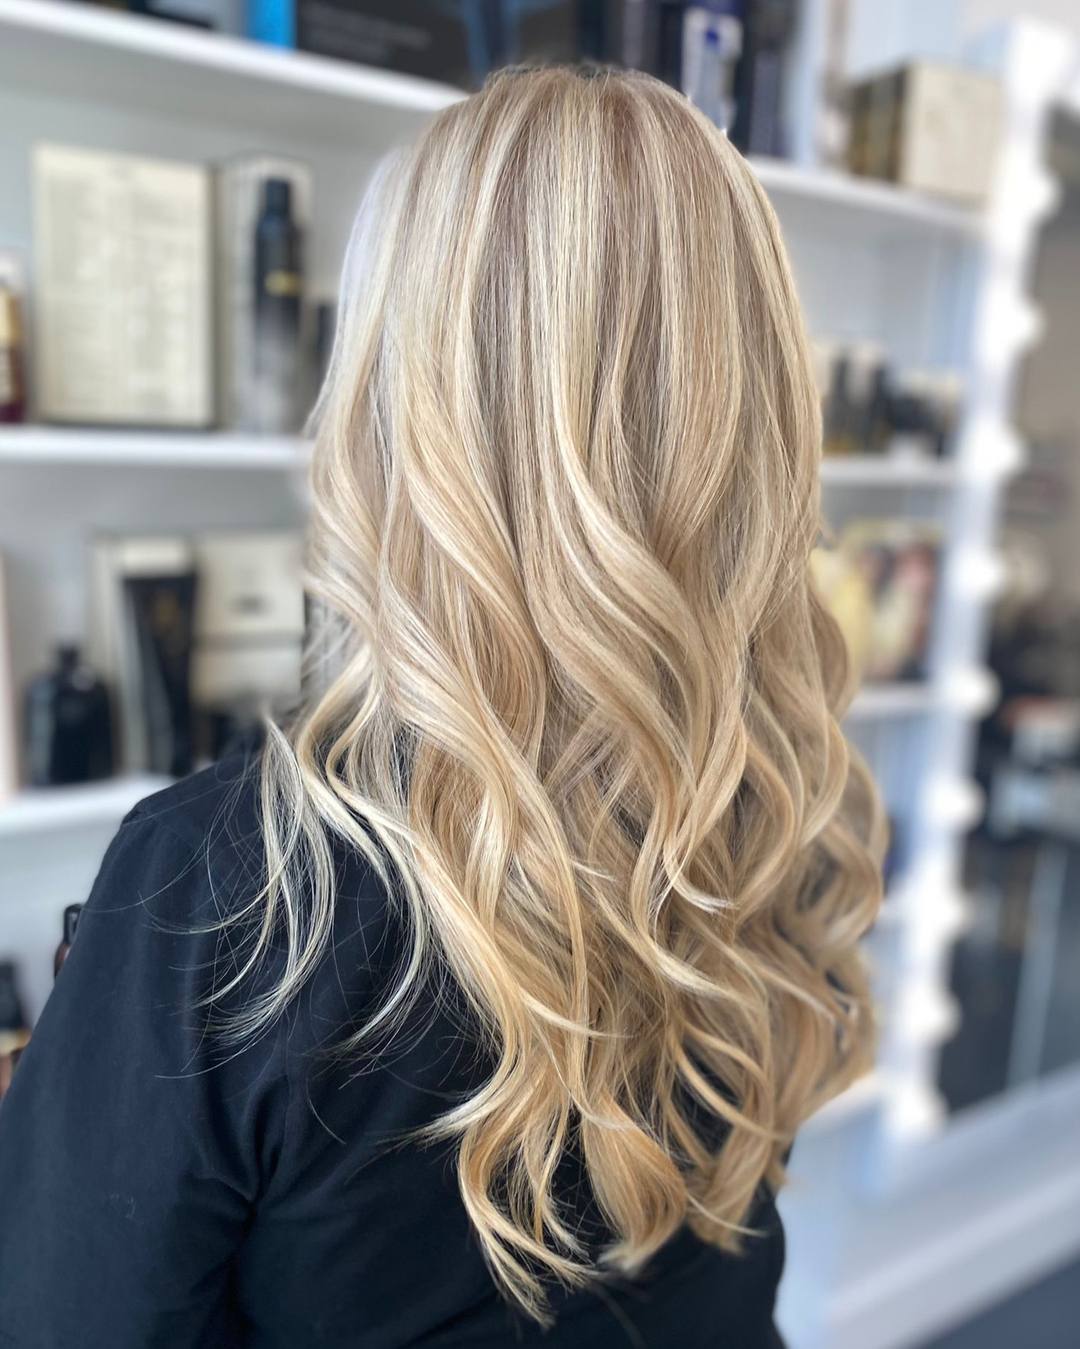 Blended Blonde: Hair Trend You Must Try